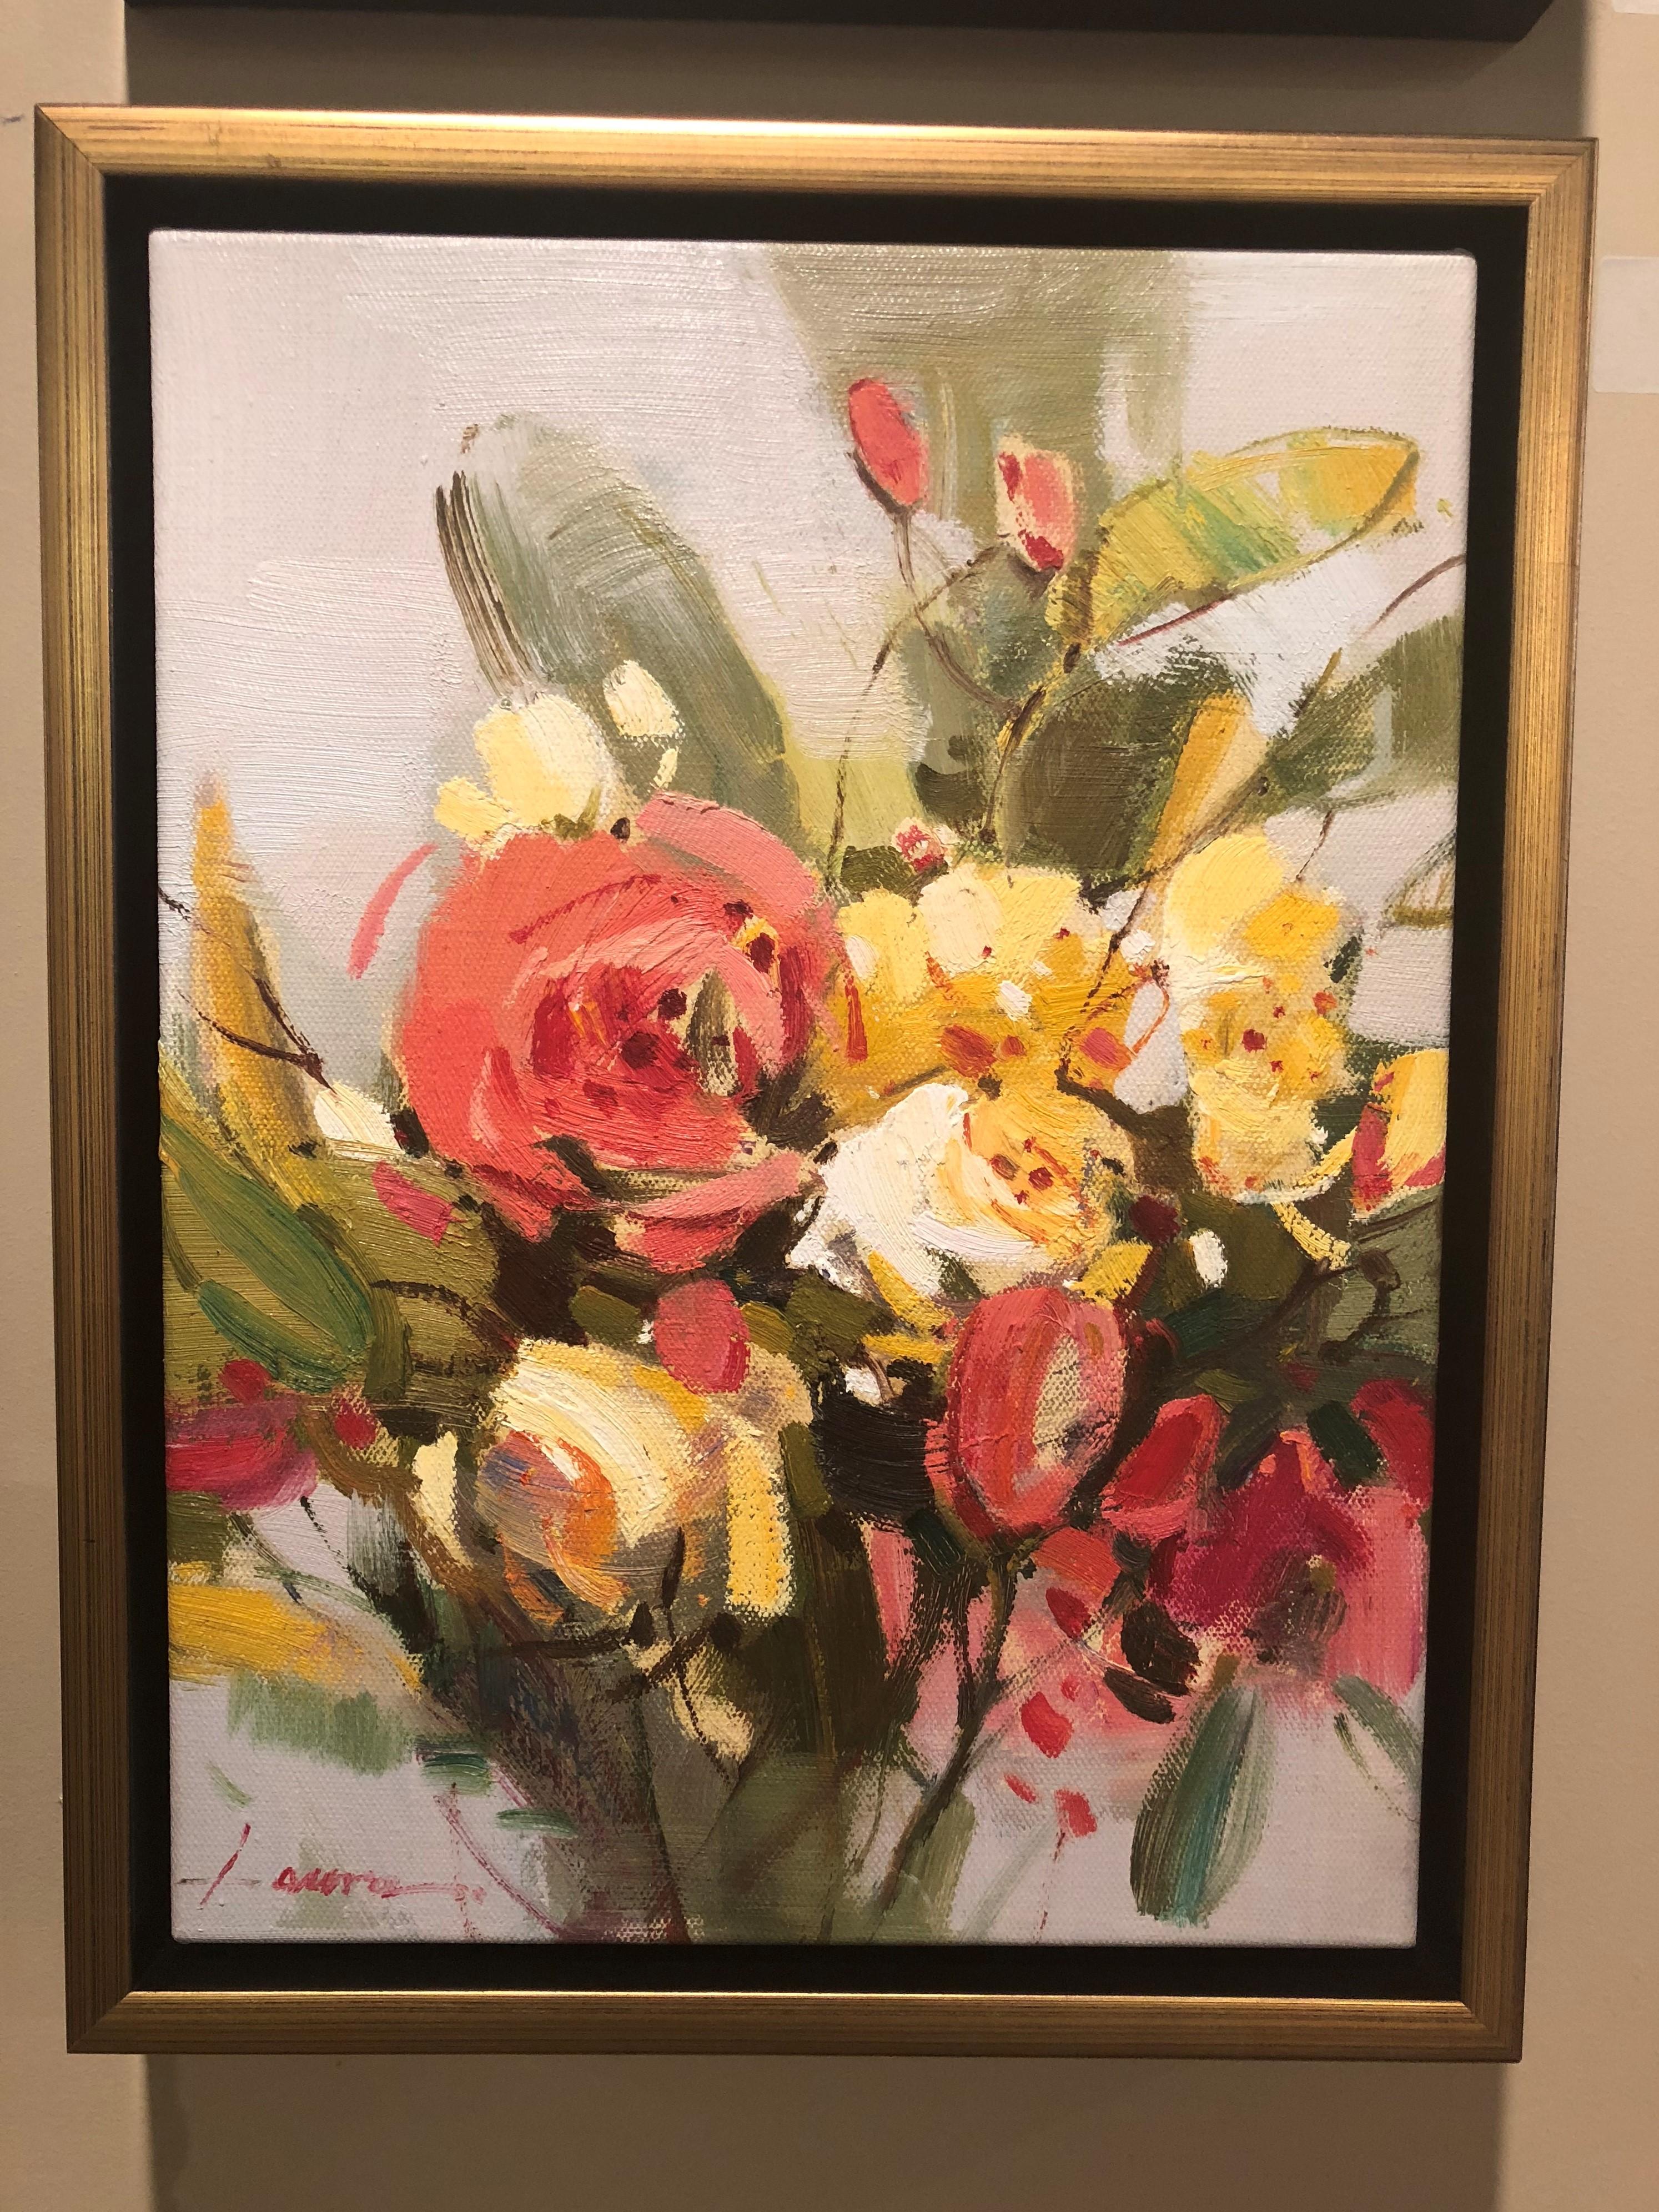 Item is in excellent condition and has only been displayed in a gallery setting. Item includes custom built frame; framed dimensions are approximately 14 x 18 inches.

Laura was born May 15th, 1983 at TaeRings City, RyoLing Providence in China.